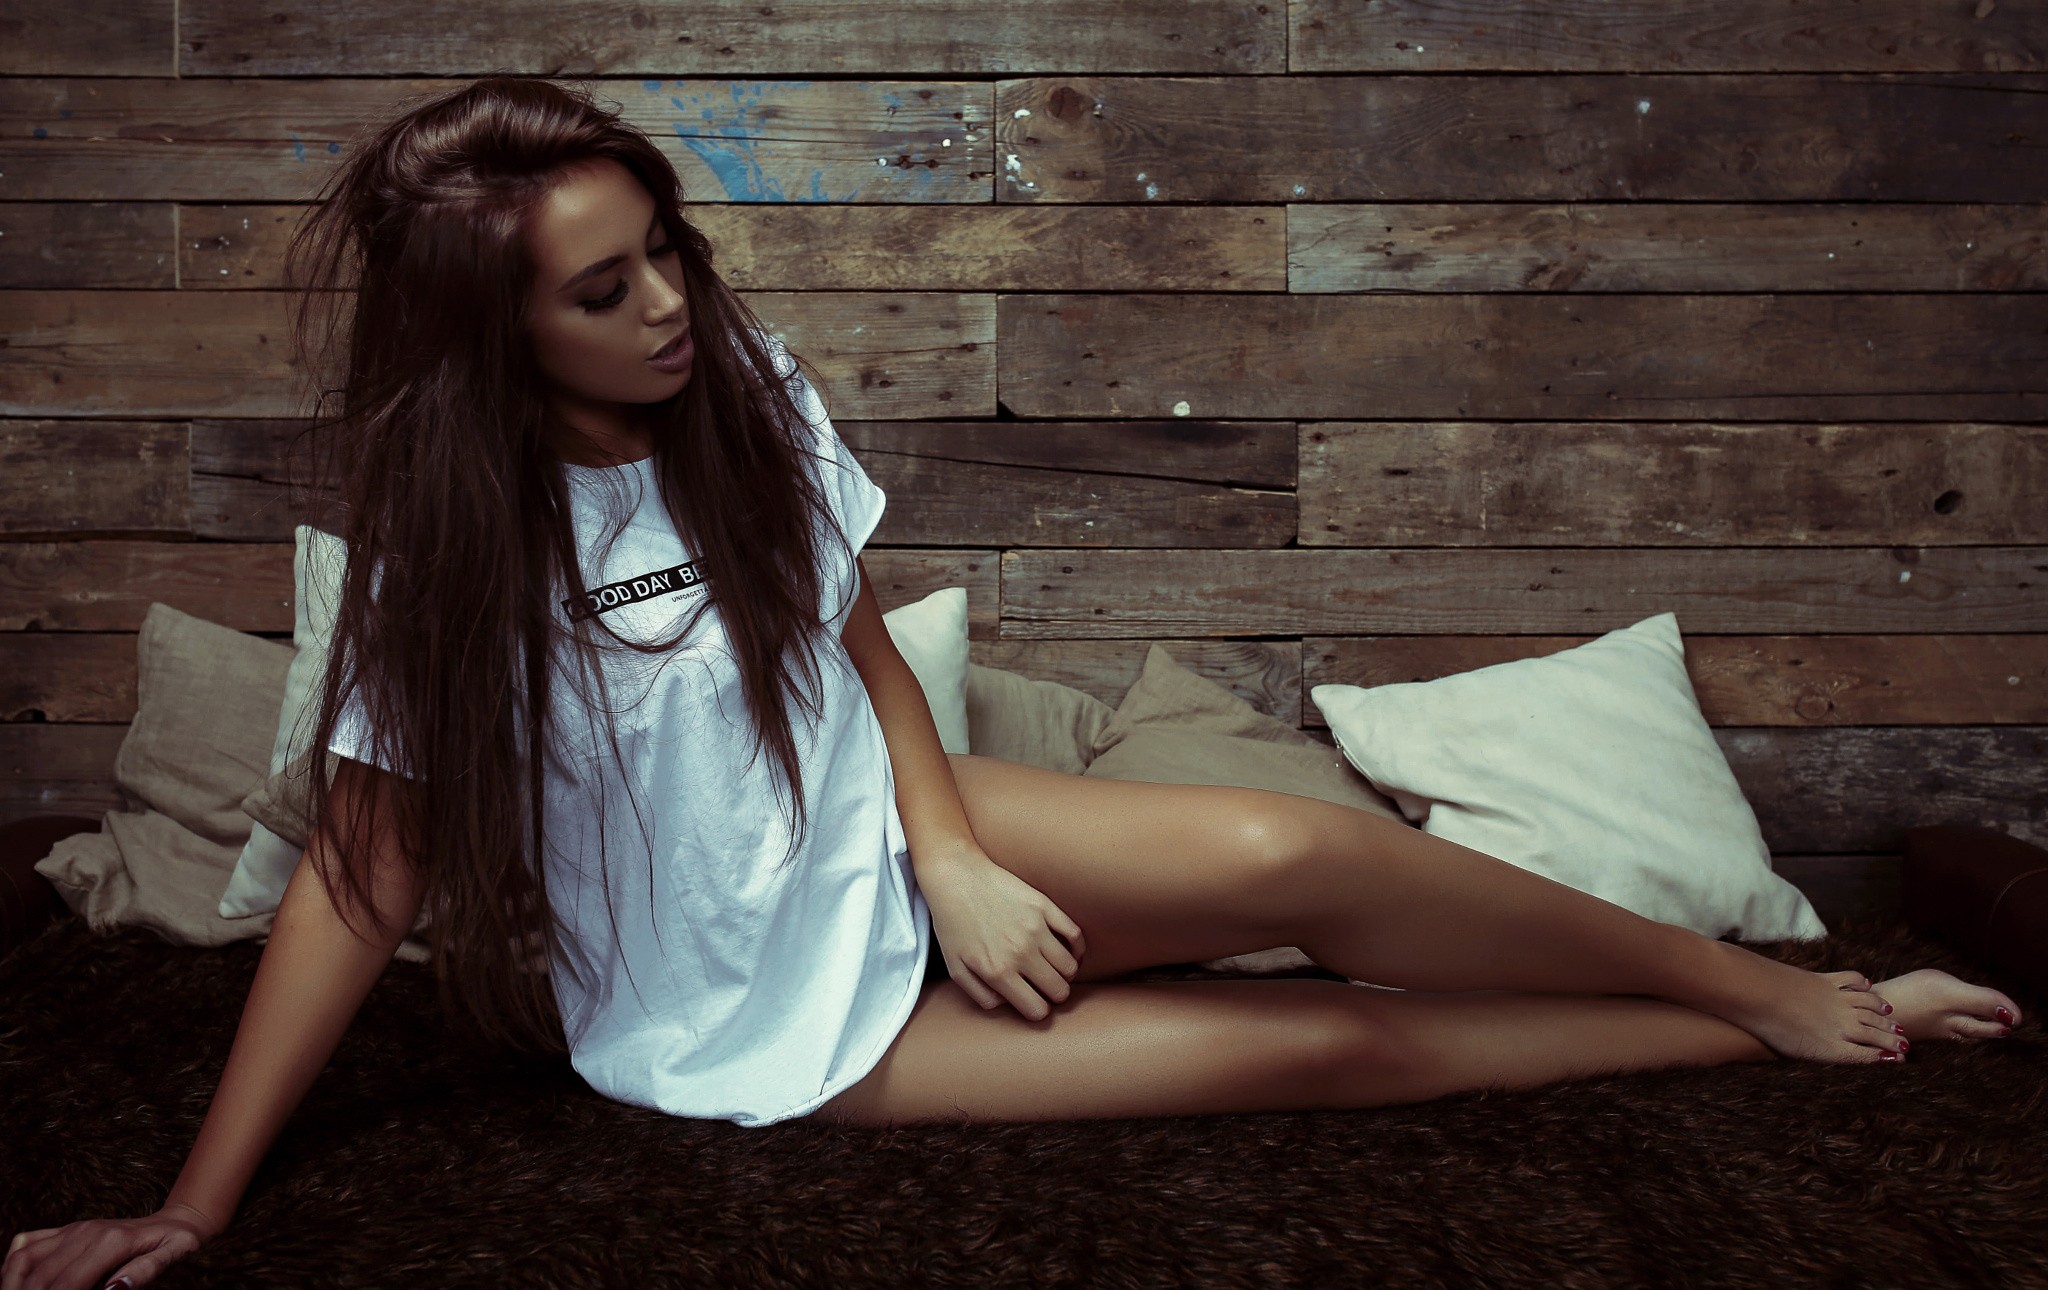 People 2048x1290 Anna Lena wall model looking away T-shirt brunette closed eyes painted nails legs thighs painted toenails printed shirts long hair women indoors indoors sitting women